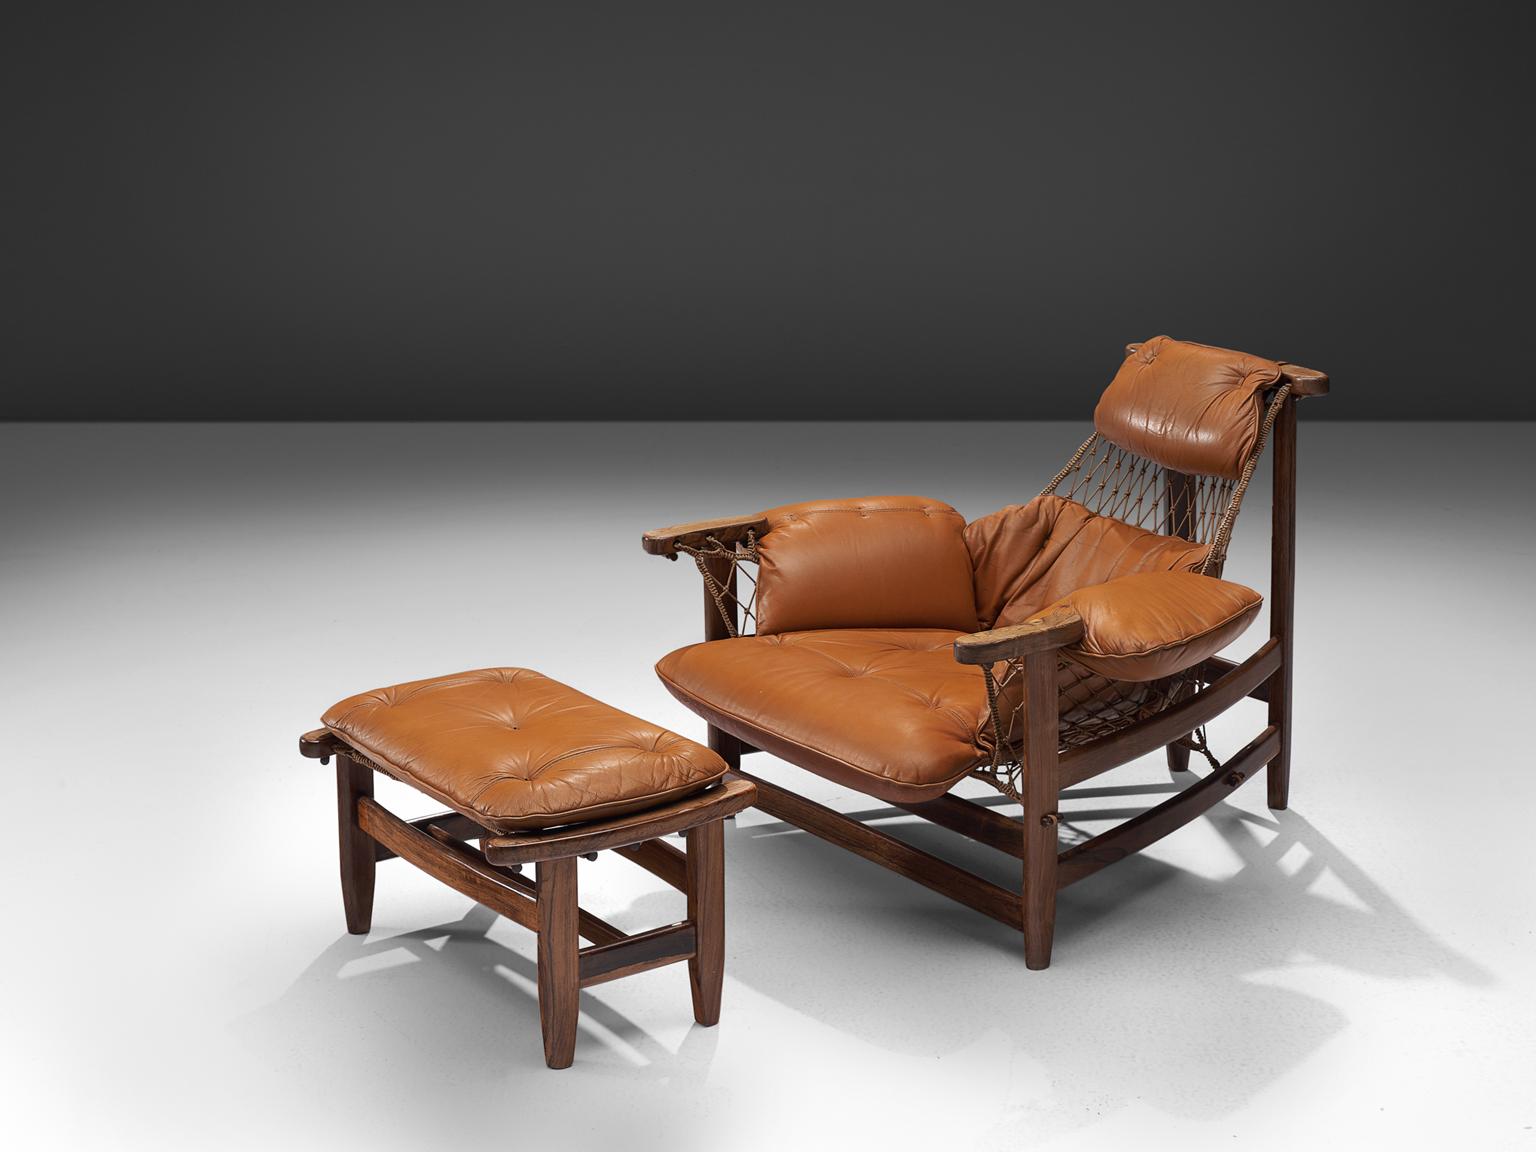 Jean Gillon, 'Jangada' armchair and ottoman, rosewood, nylon rope, cognac leather, Brazil, 1968.

This robust and hefty armchair is designed by Jean Gillon. The originality of this Janganda comes from the concept of the body being captured by the